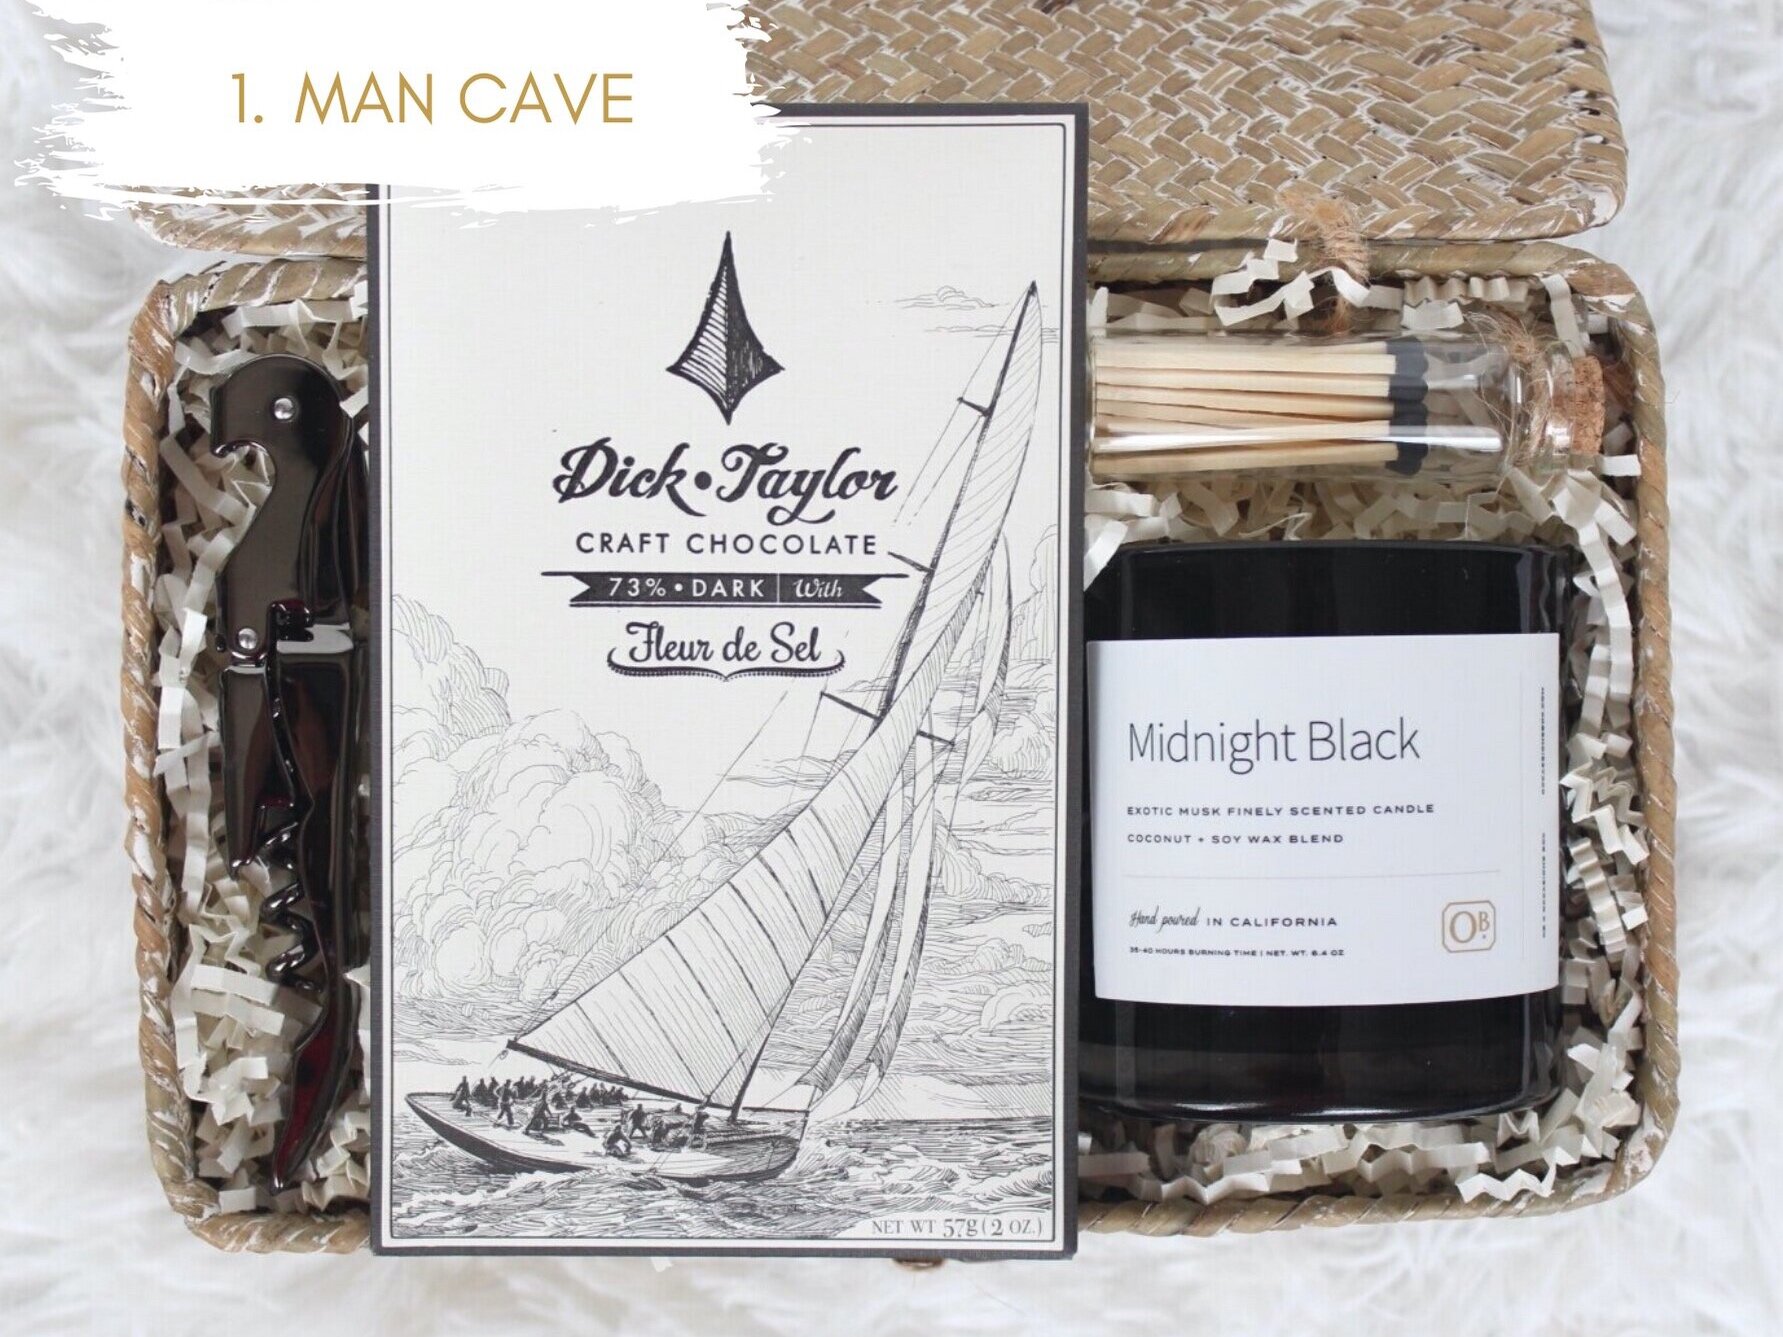  “Although this box is called Man Cave. Don’t let its masculine feel deter you from considering it for that female graduate. I am a woman and I love that this box is a curation that is modern yet mature. This box is actually perfect for anyone specia